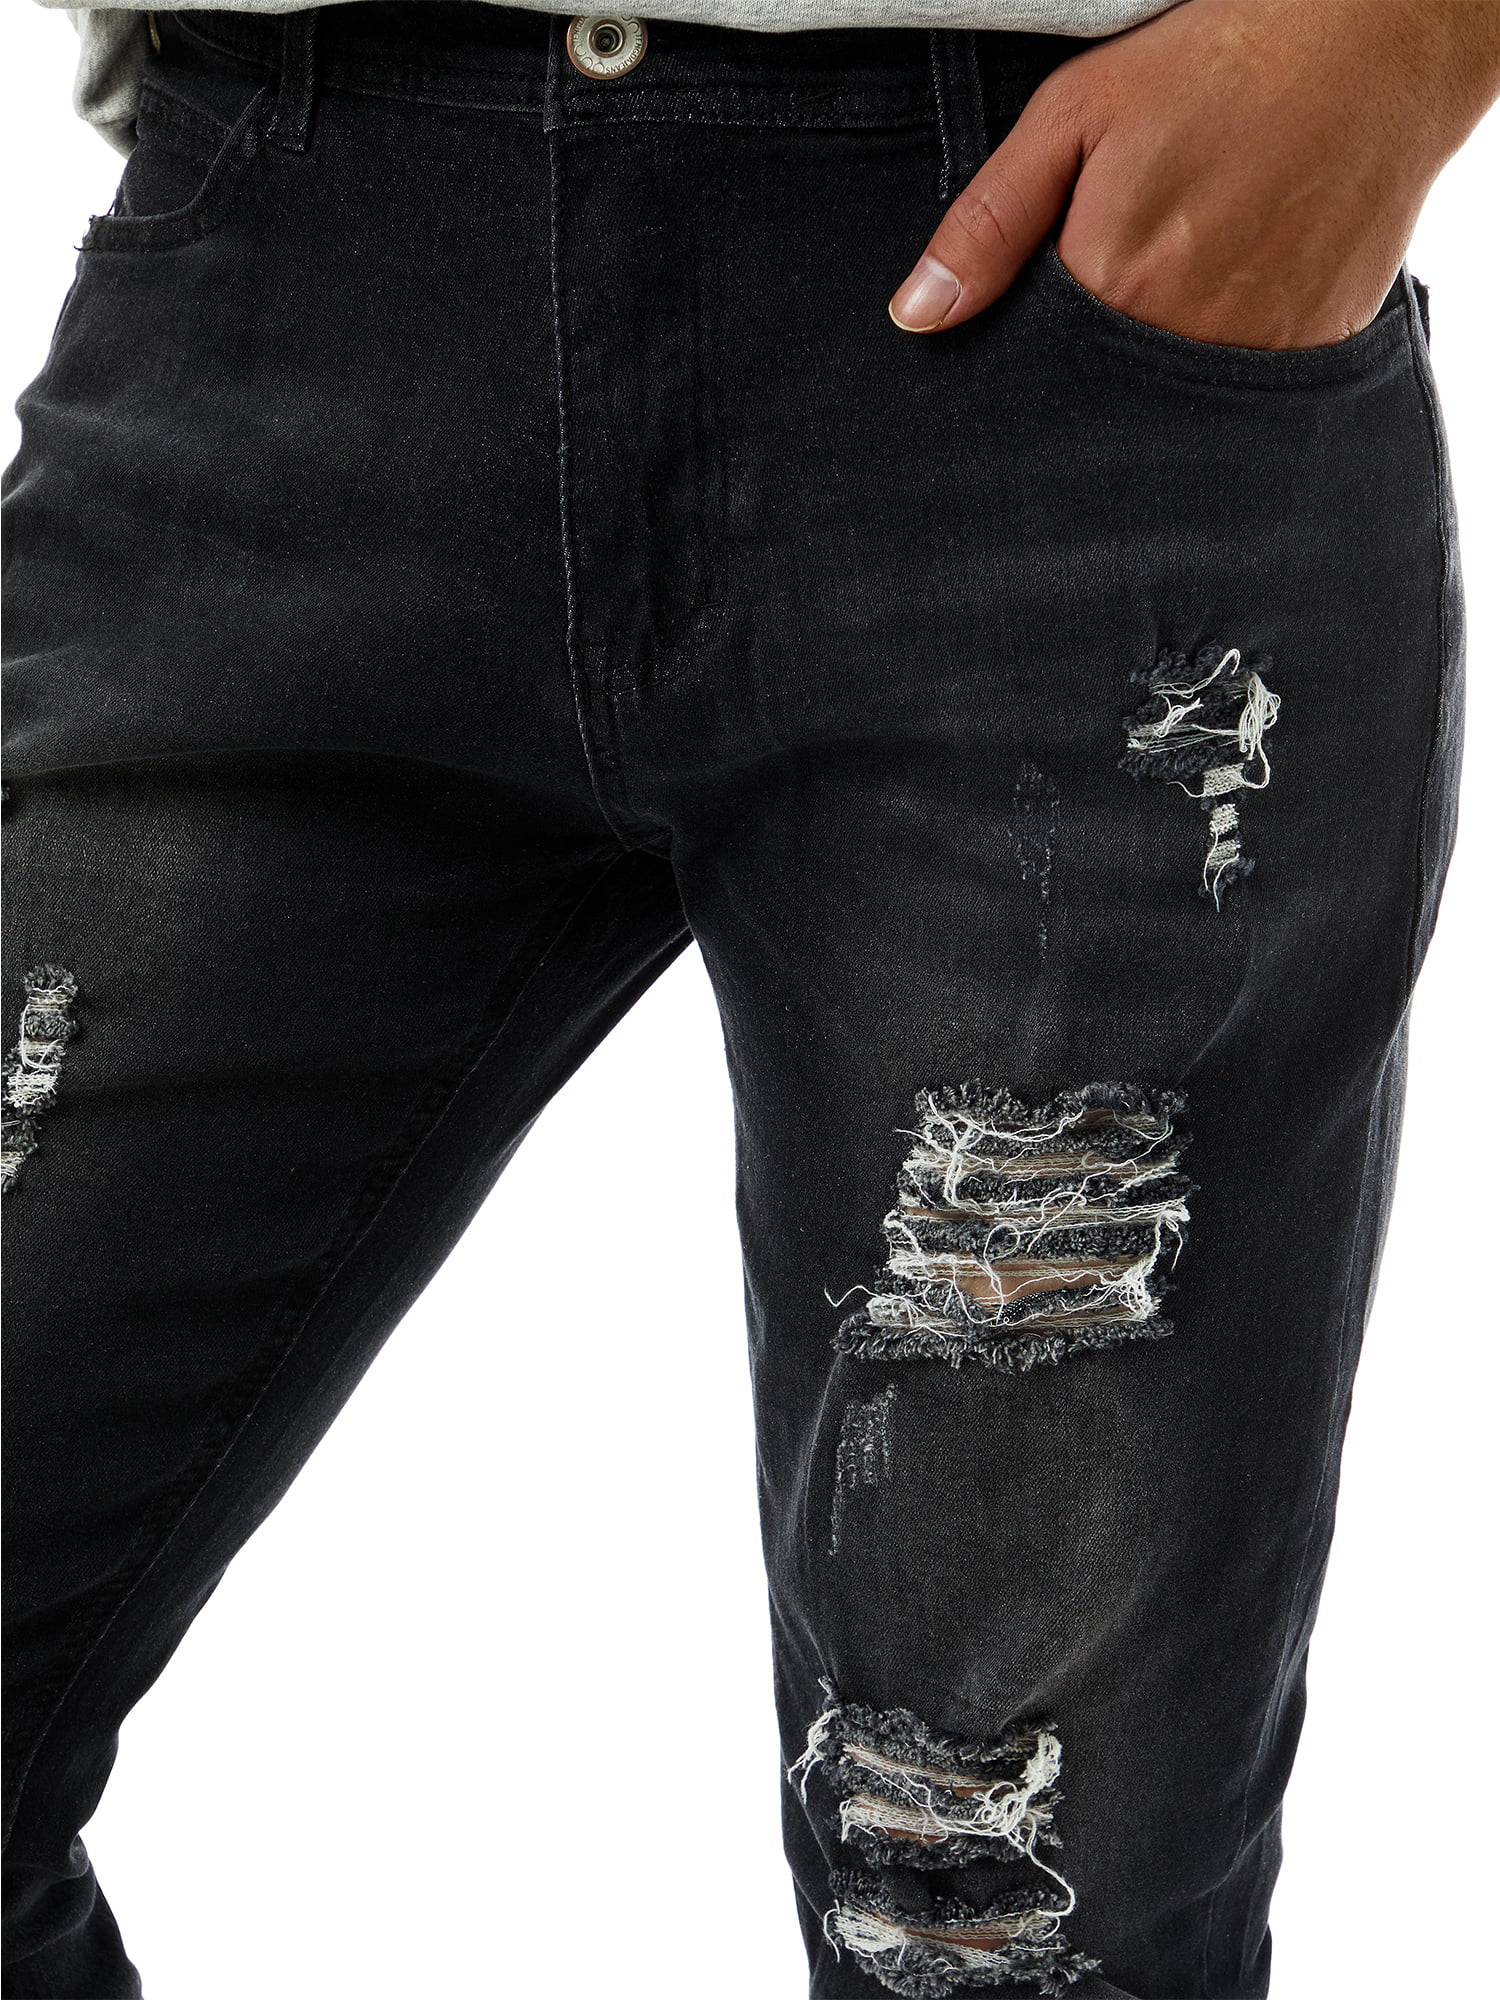 Source Knee Hole Zipper Bottom Ripped High Quality Mans Jeans for Men Denim  Pencil Pants Slim, Skinny 2020 New Letter Embroidered on m.alibaba.com